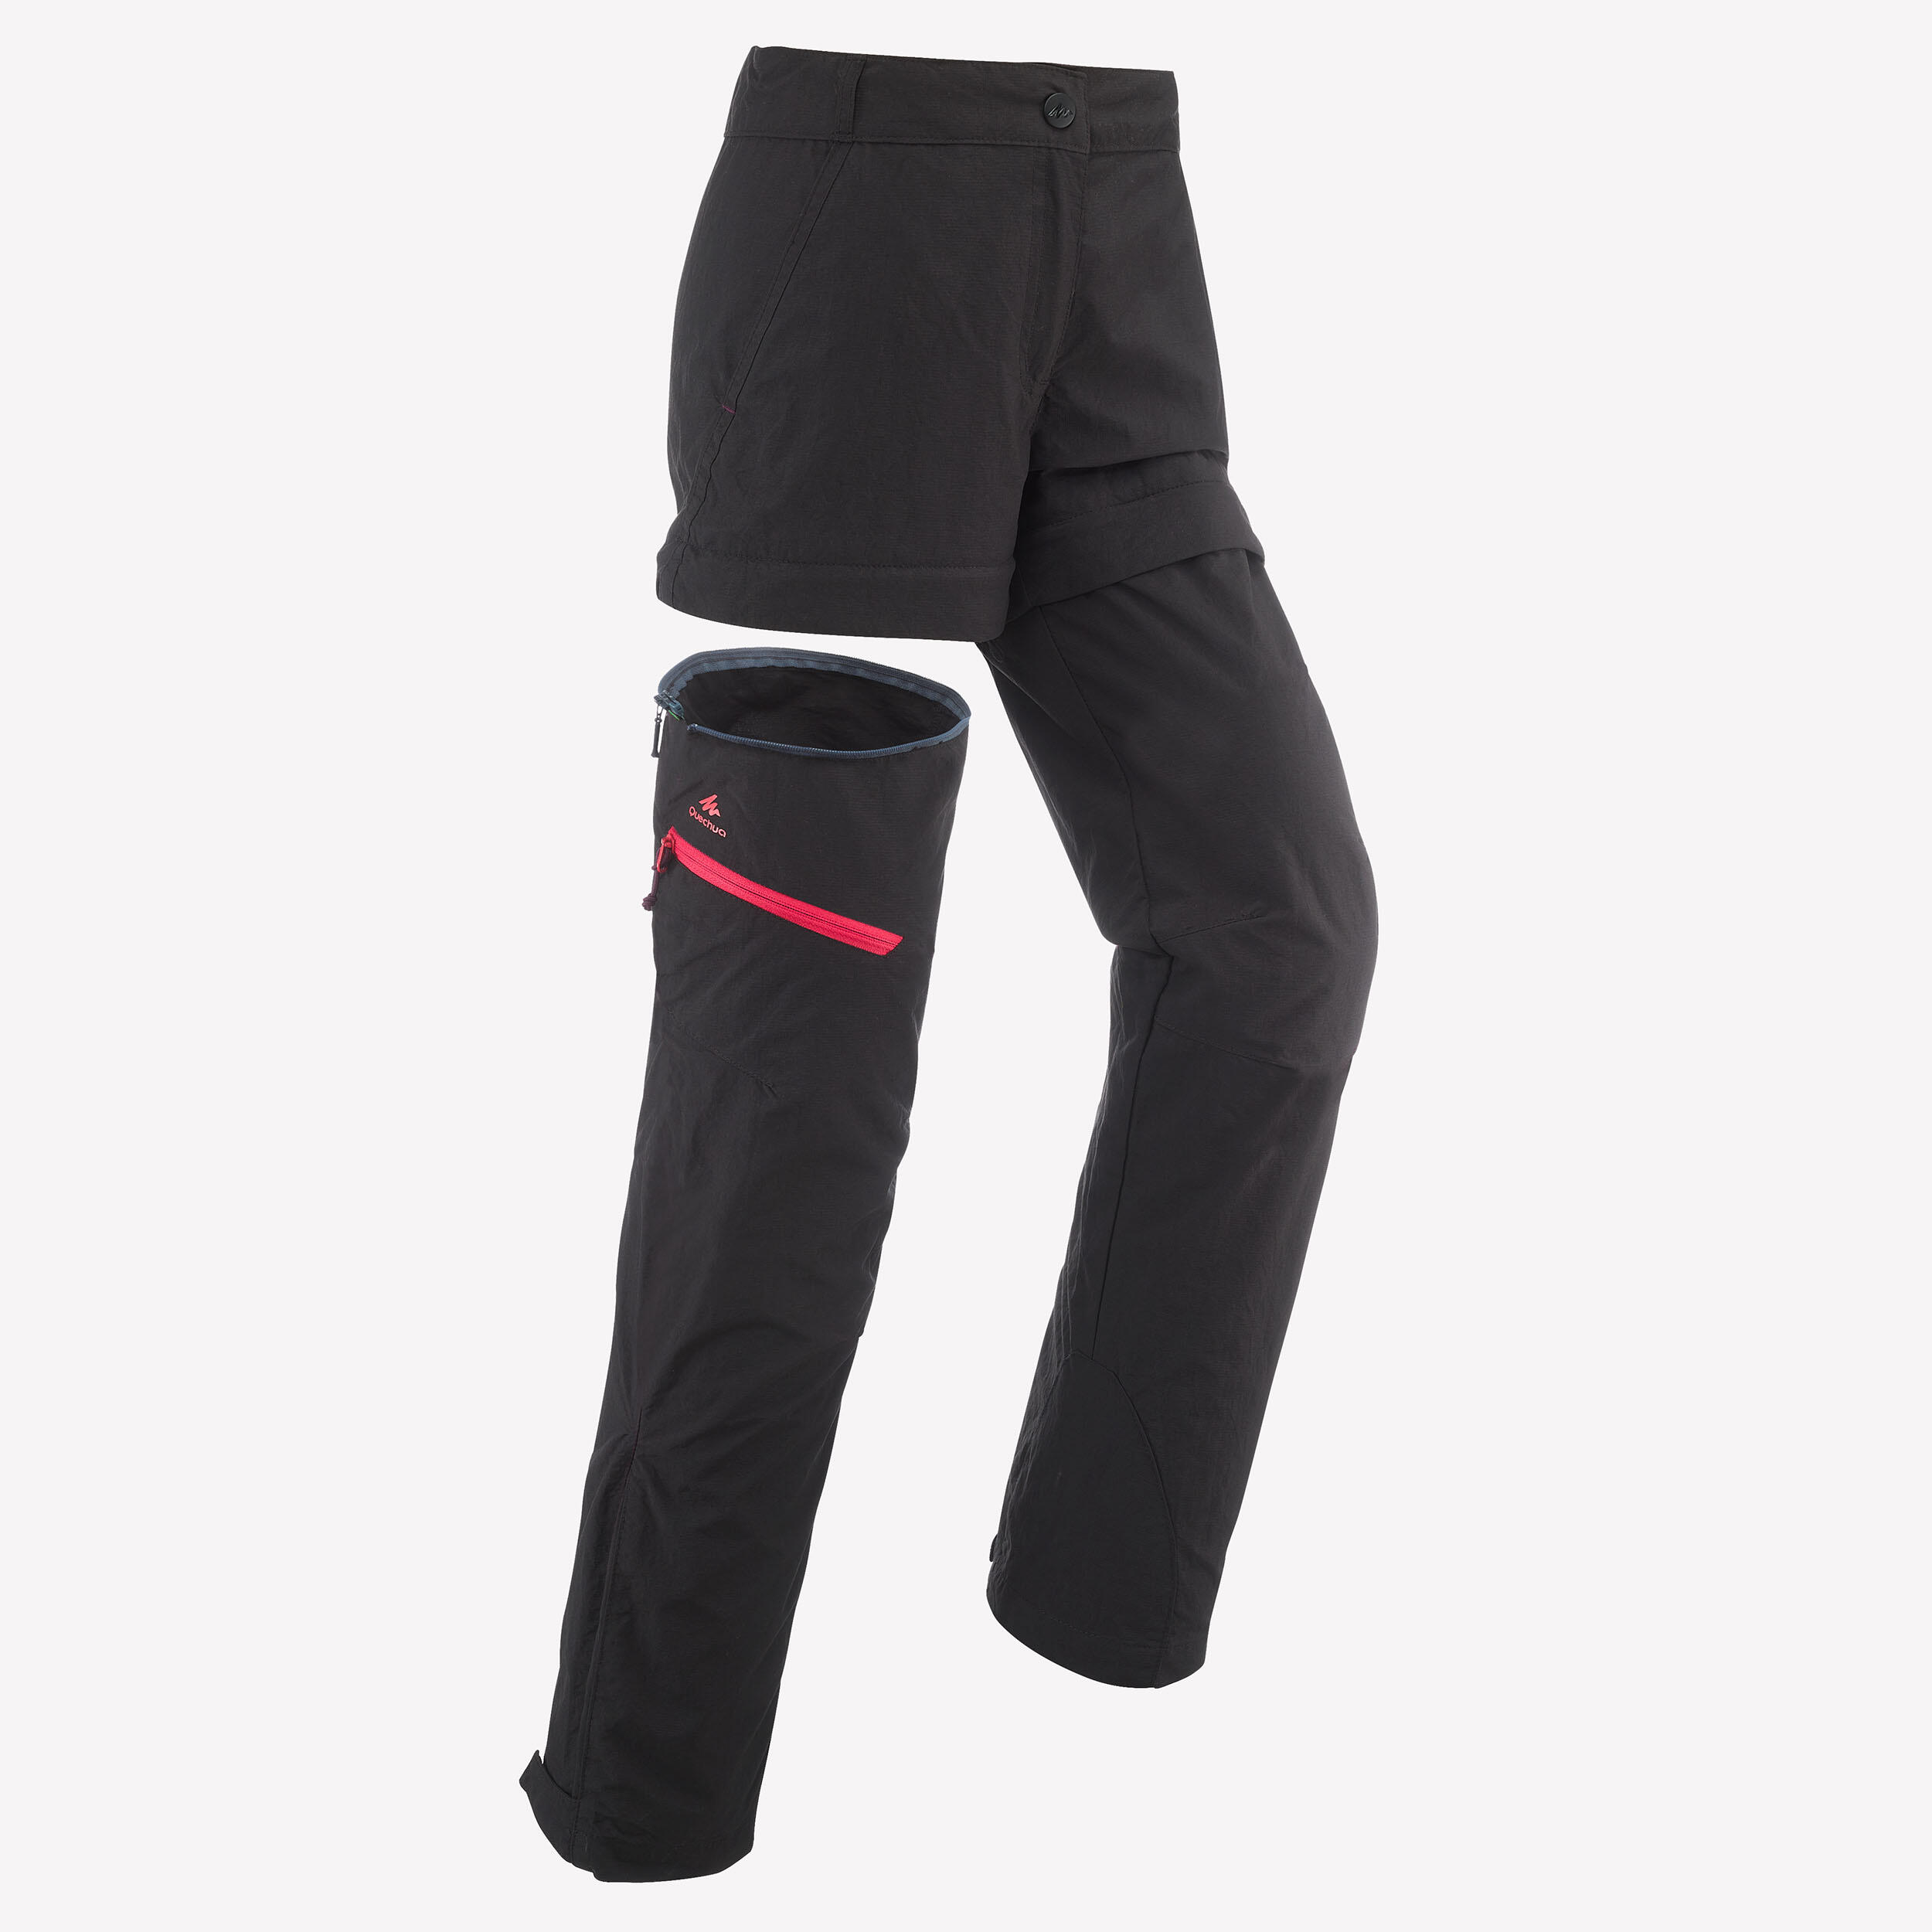 Buy Decathlon -Men's Snow Hiking Warm Water Repellent Stretch Trousers  SH500 X-Warm -Street Studio (Size: 2XL) Numerical Size: 38 at Amazon.in